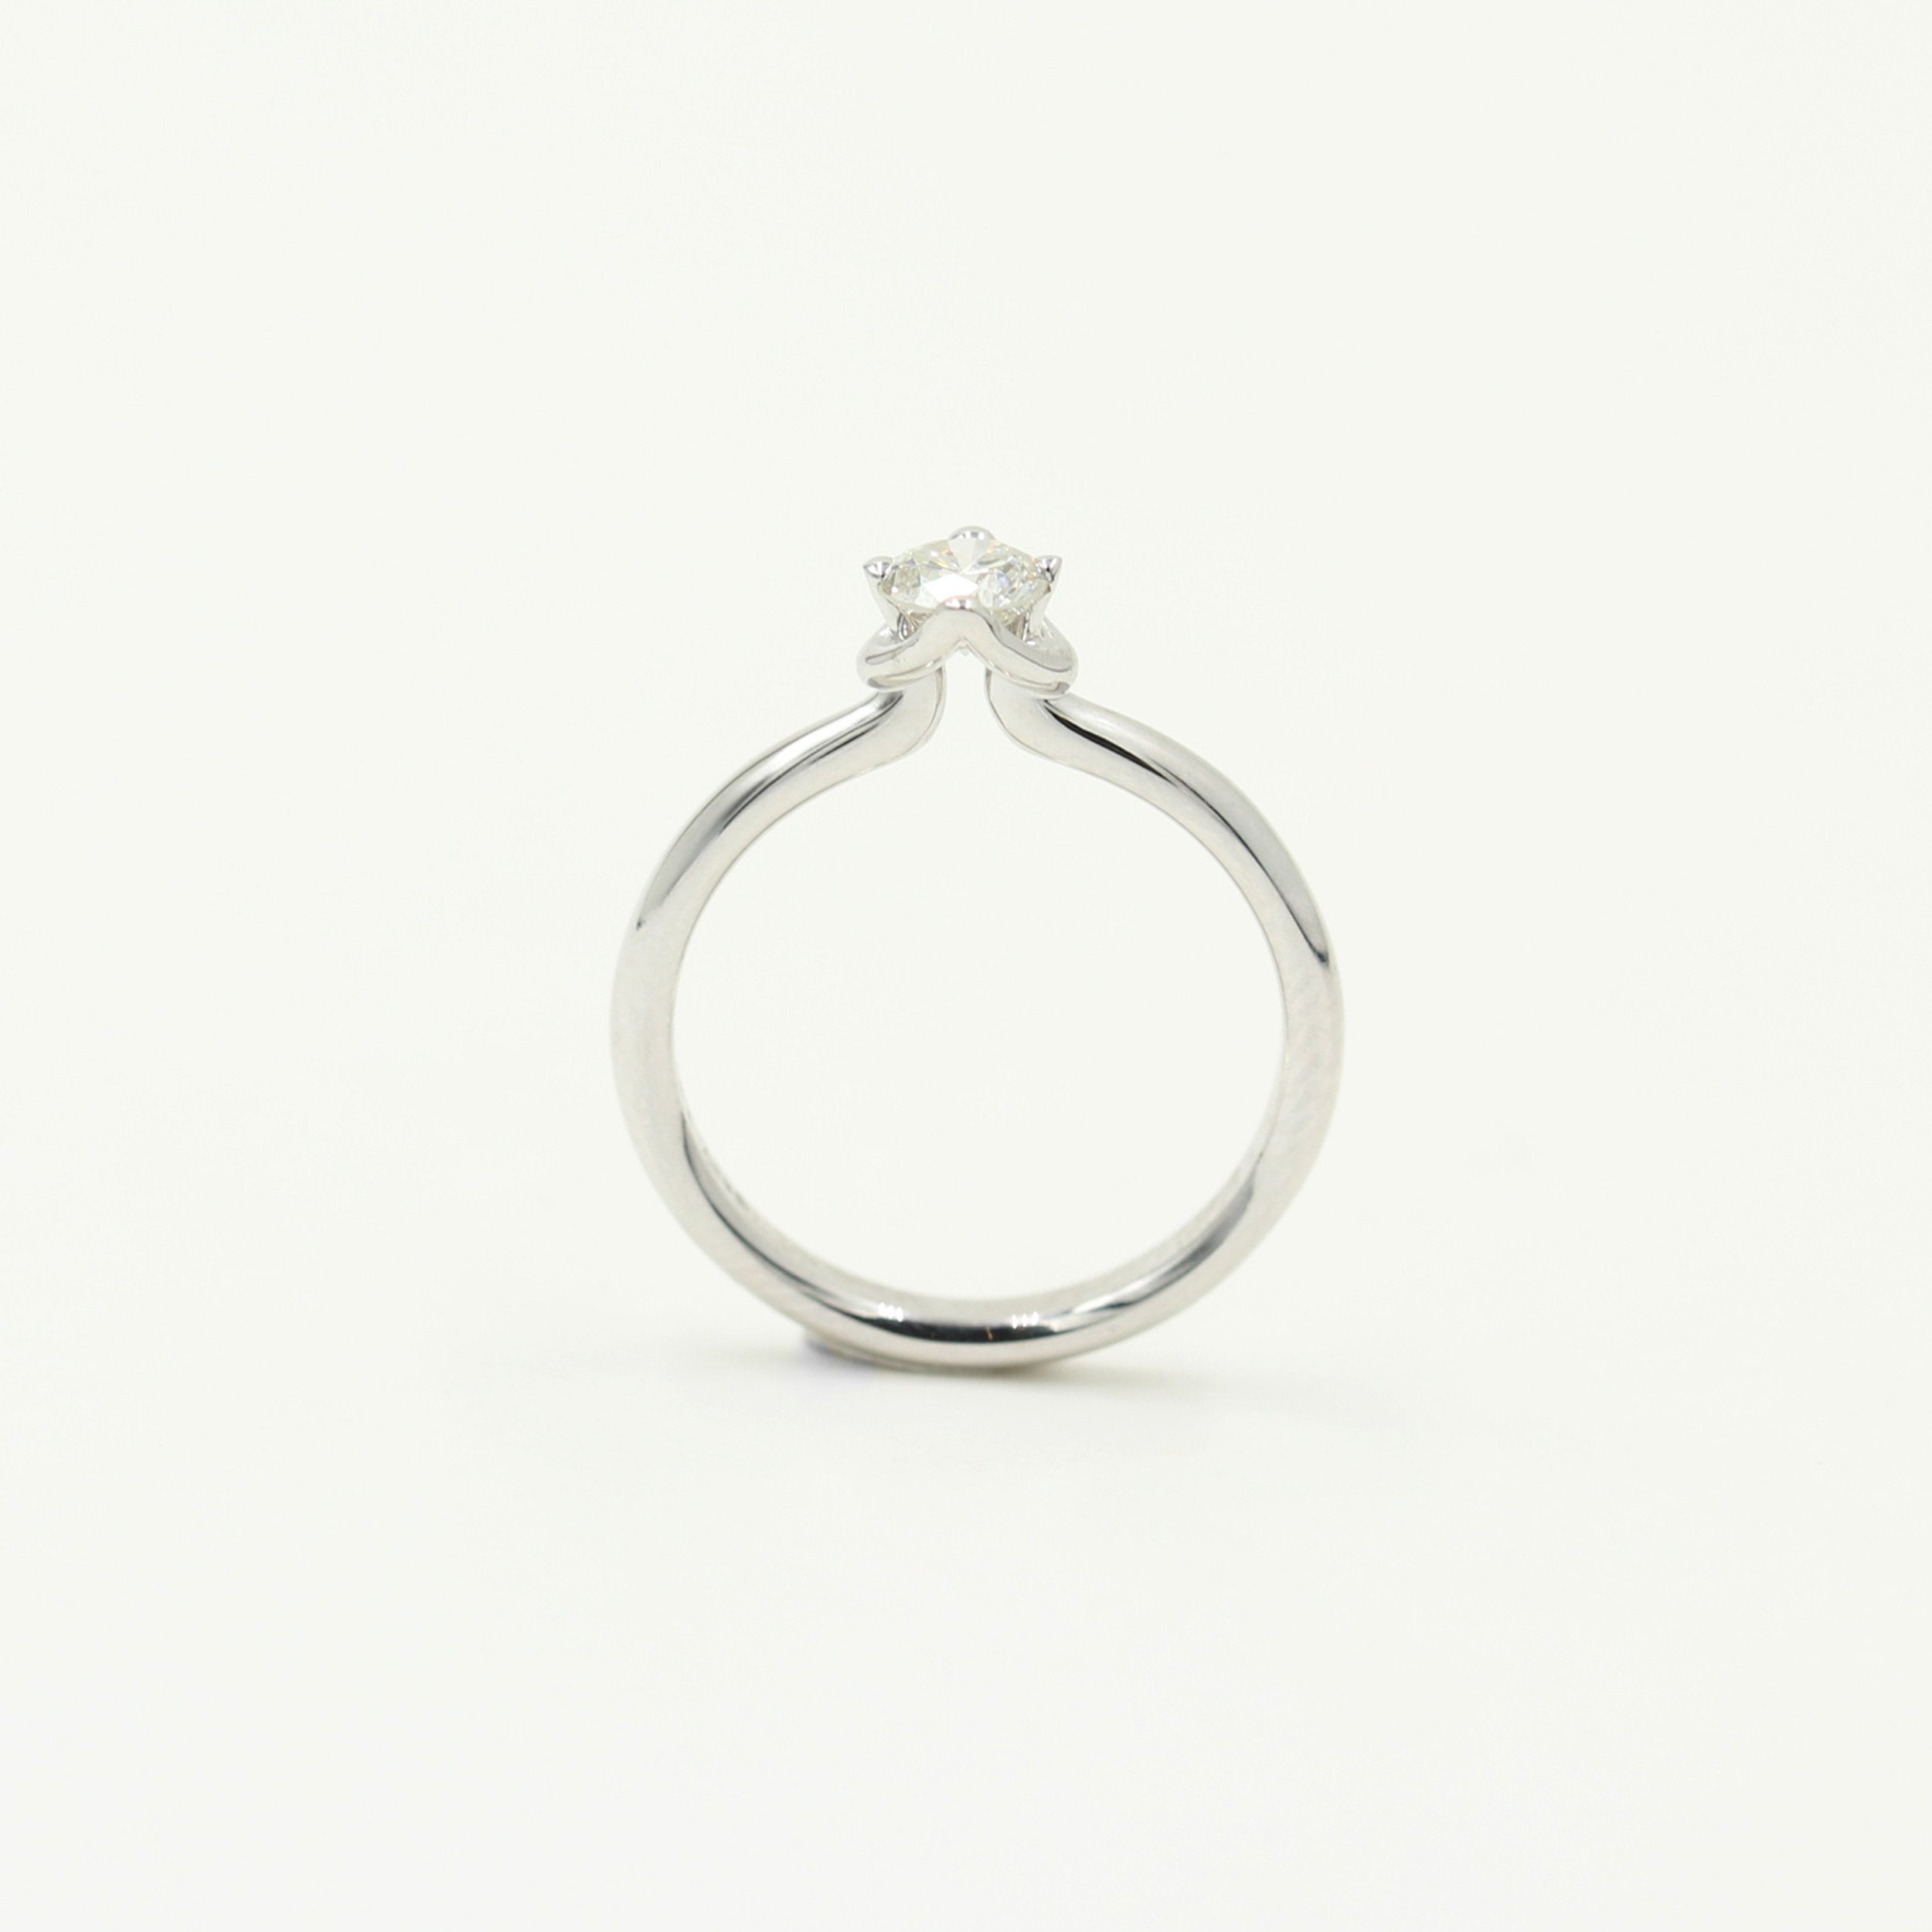 Solitairering med 0,47 ct. G.SI2 brillant